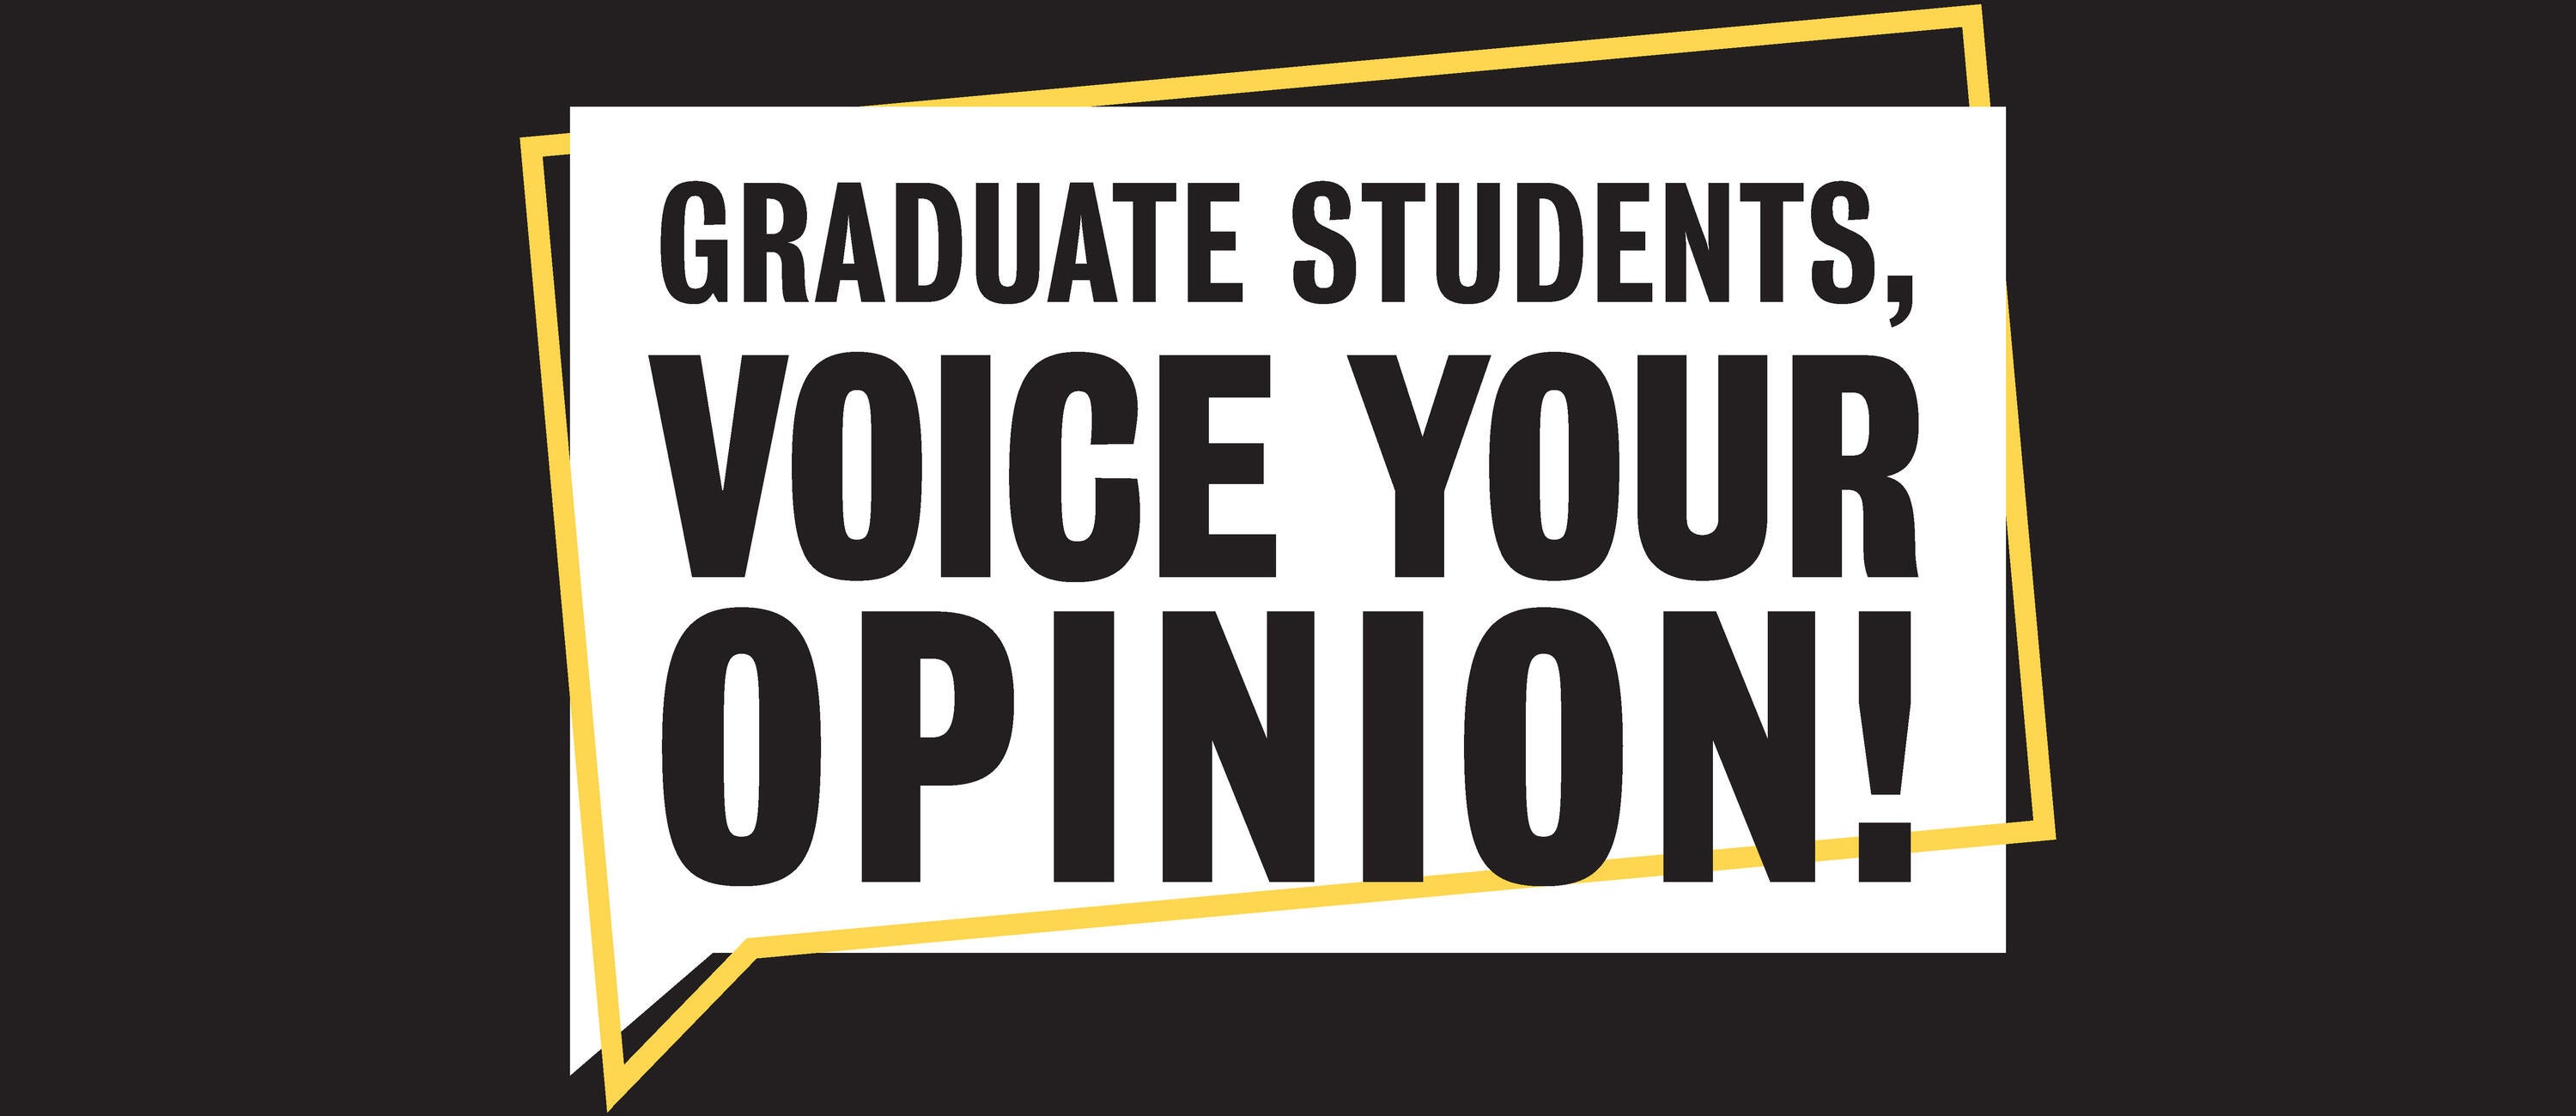 Graduate students, voice your opinion